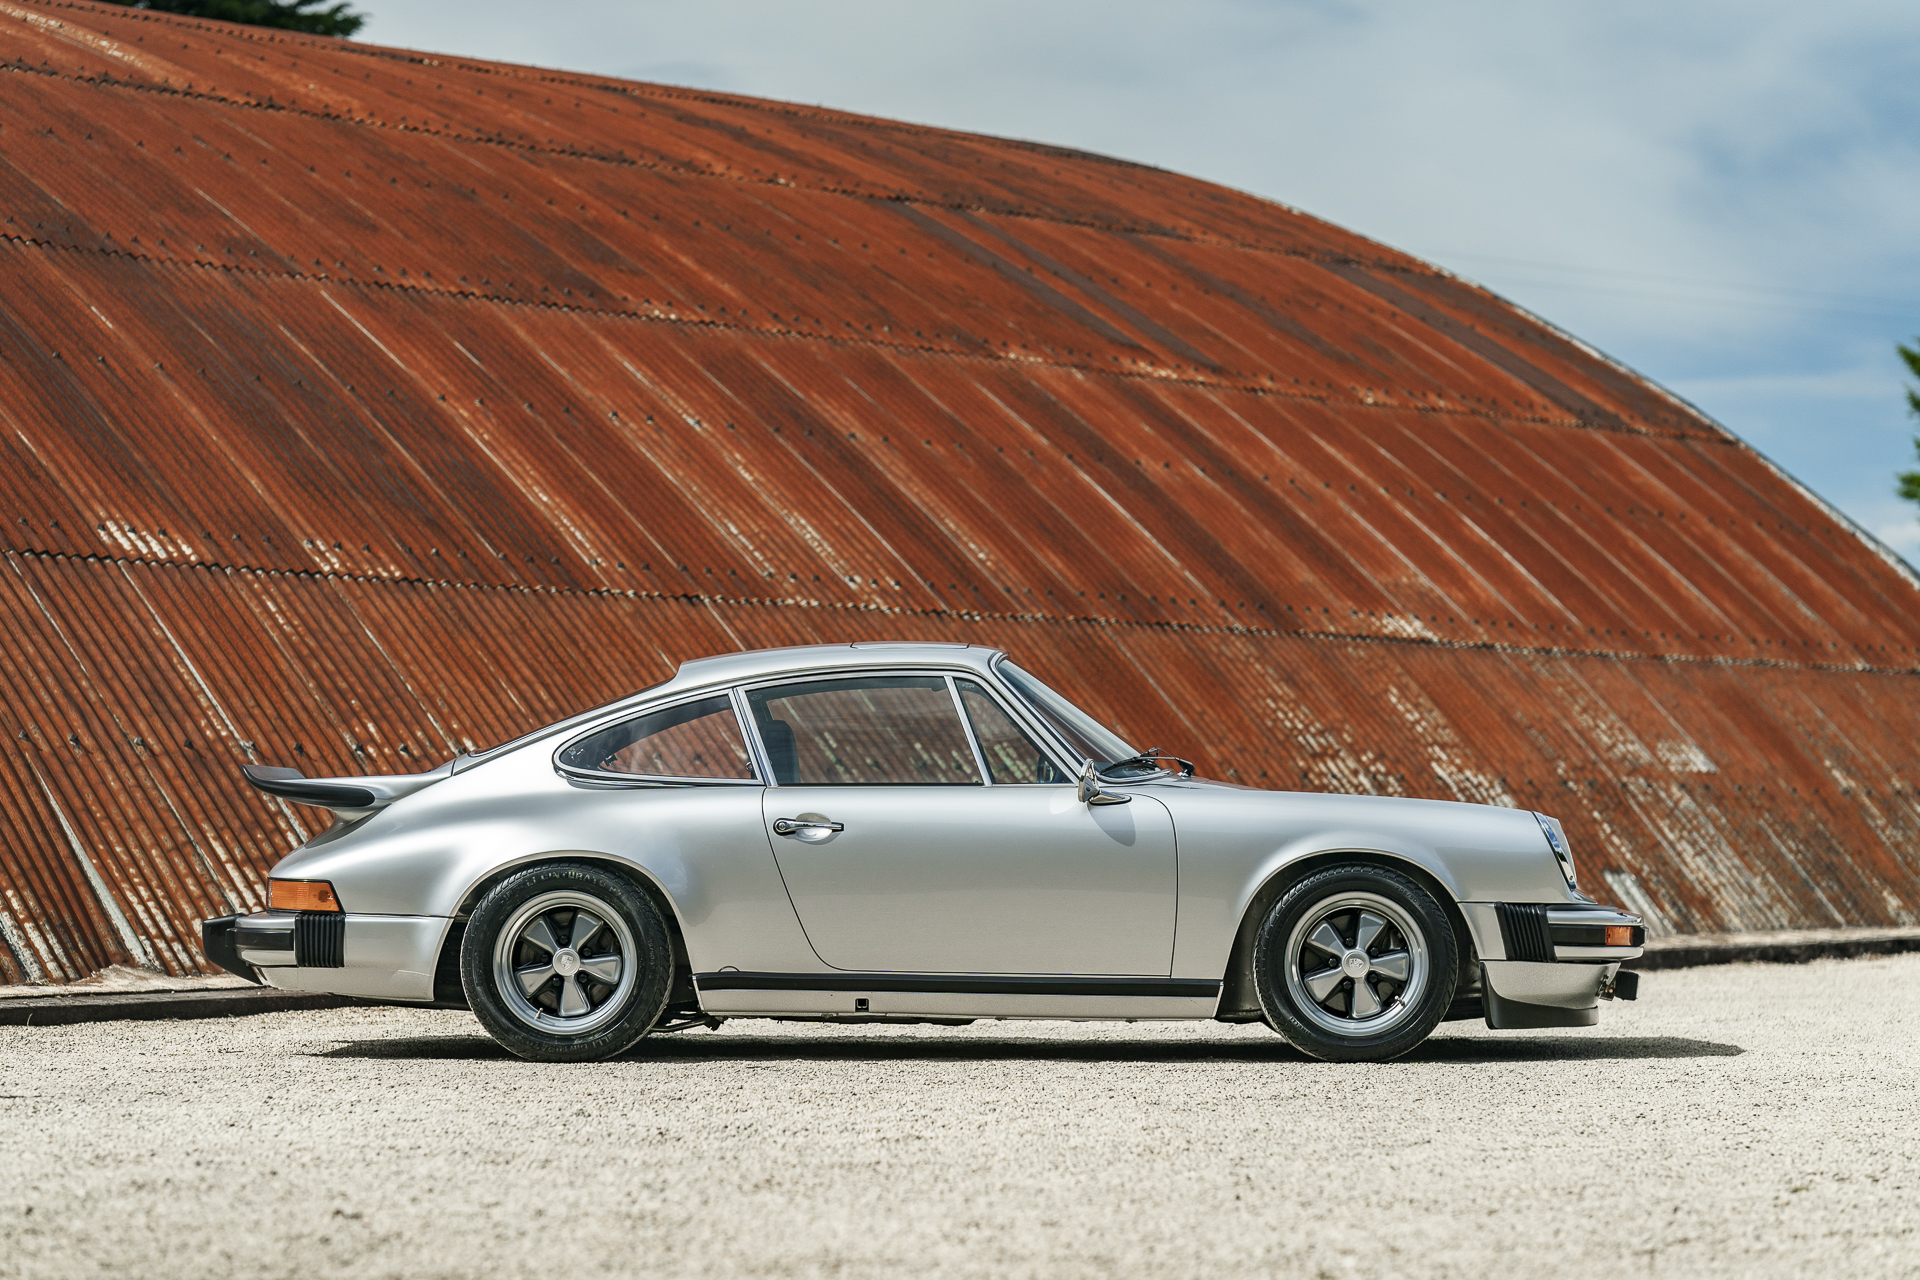 1975 Porsche 911 3.0 for sale at The Classic Motor Hub